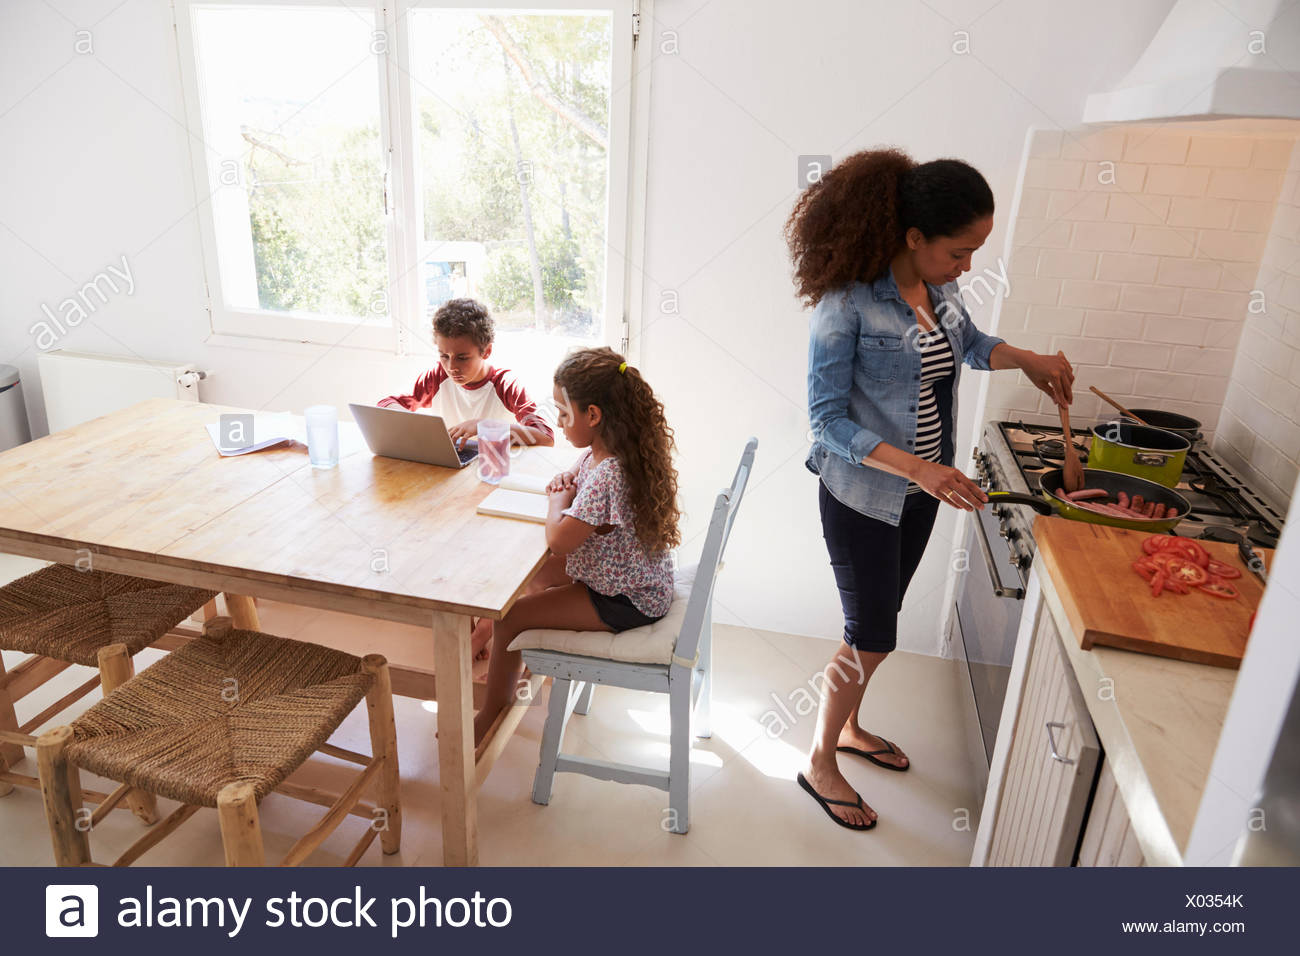 Mum Cooking While Kids Work At Kitchen Table